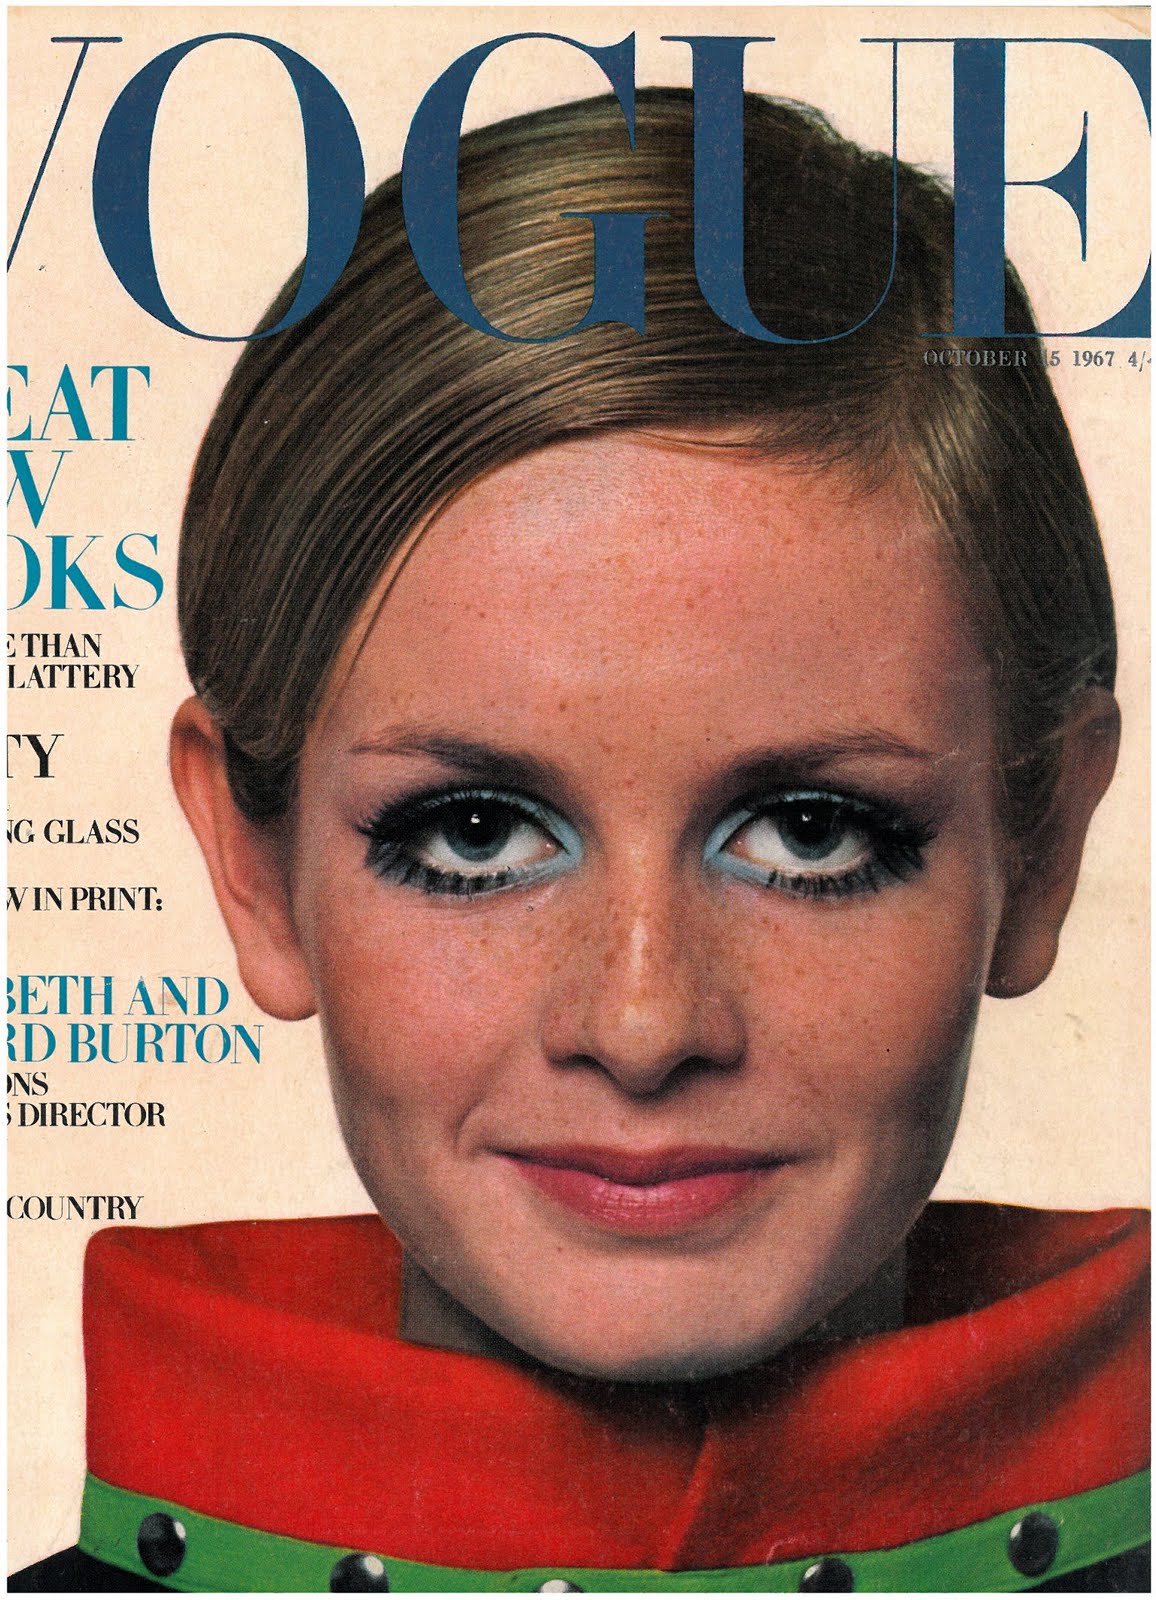 youthquakers: 15th October 1967 - UK Vogue 1st UK Twiggy Cover